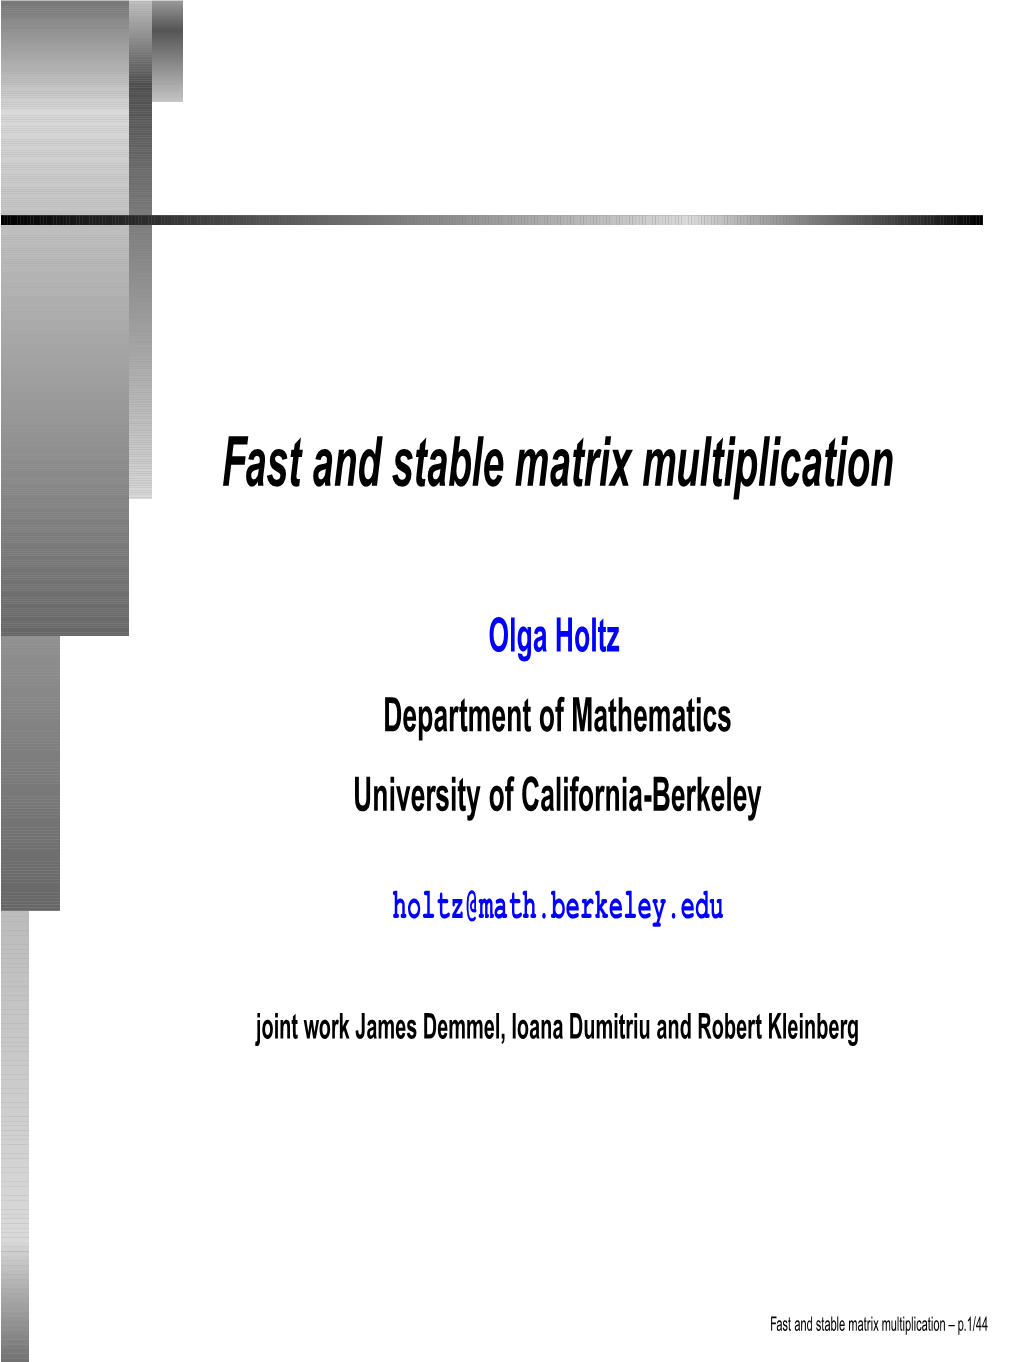 Fast and Stable Matrix Multiplication